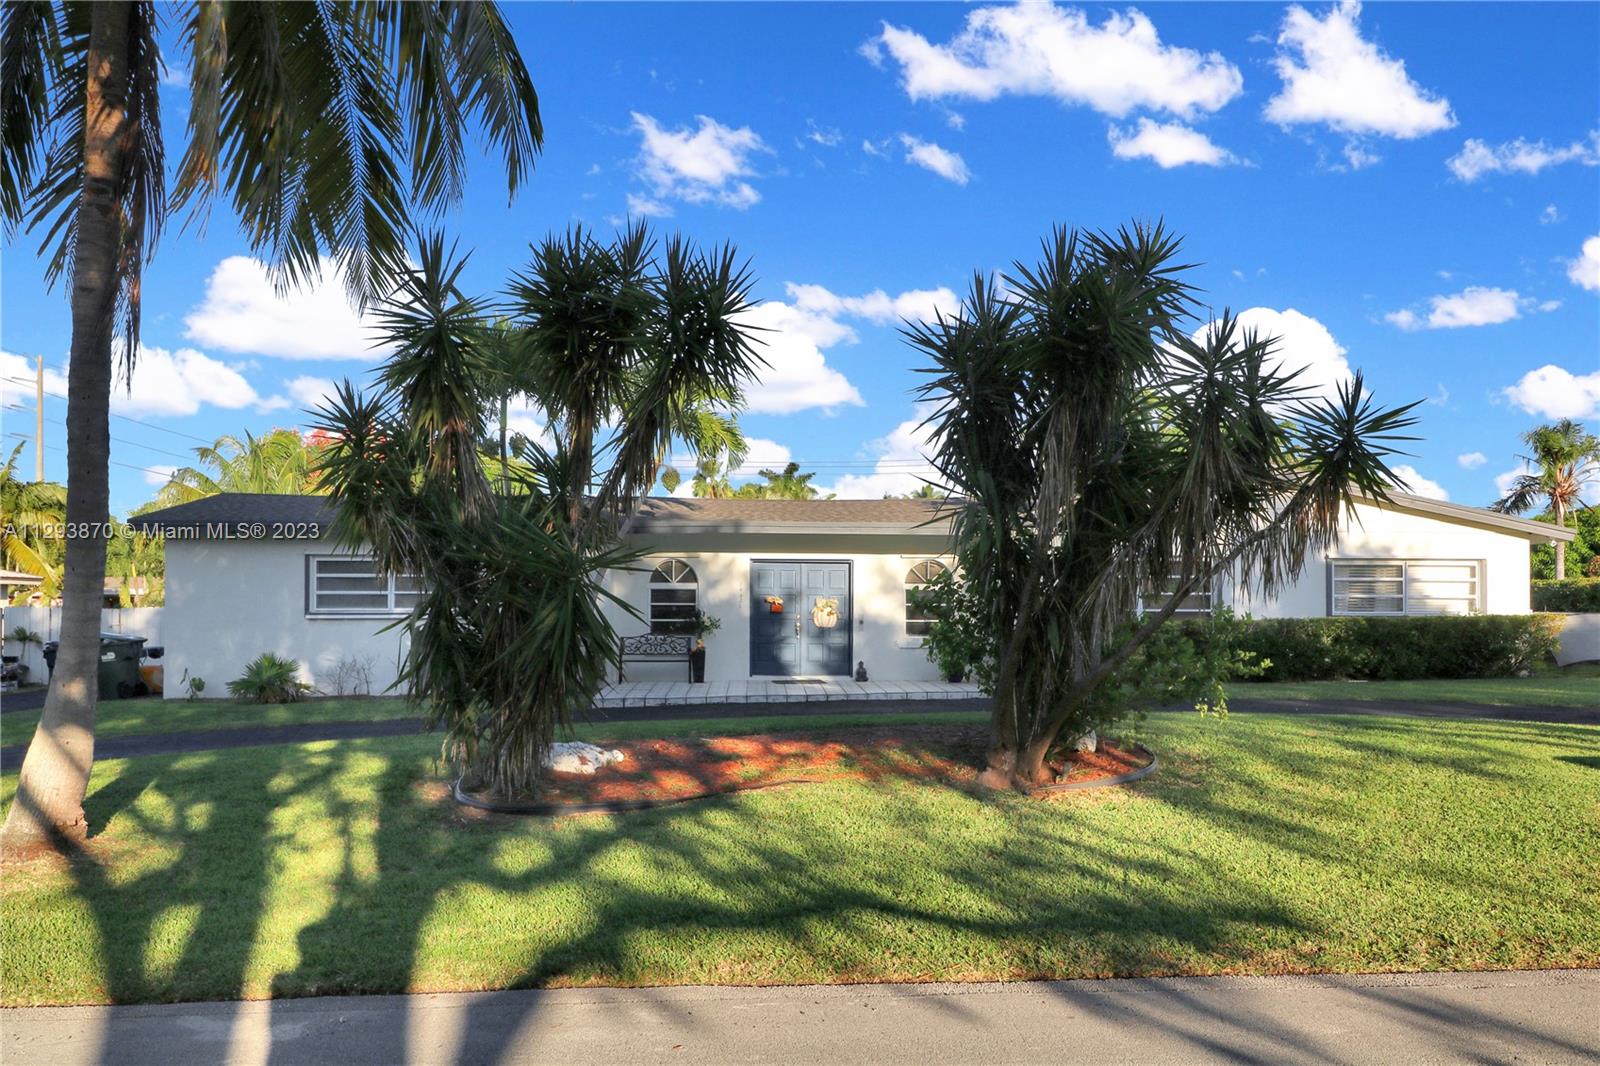 Don't miss out on this great opportunity in Palmetto Bay! This spacious four-bedroom/three-bathroom pool home on a 17,000+ sq ft lot offers extensive living/dining areas w/ views of the pool & patio. This home features formal living & dining rooms and a spacious updated kitchen with stainless steel appliances. French doors lead you to a covered patio that overlooks a large screened pool, an ideal entertainment area. Palmetto offers access to some of Miami-Dade's most desirable public & private school districts, close to The Falls and Coral Reef Park. A true must-see to appreciate. Call for a showing today.